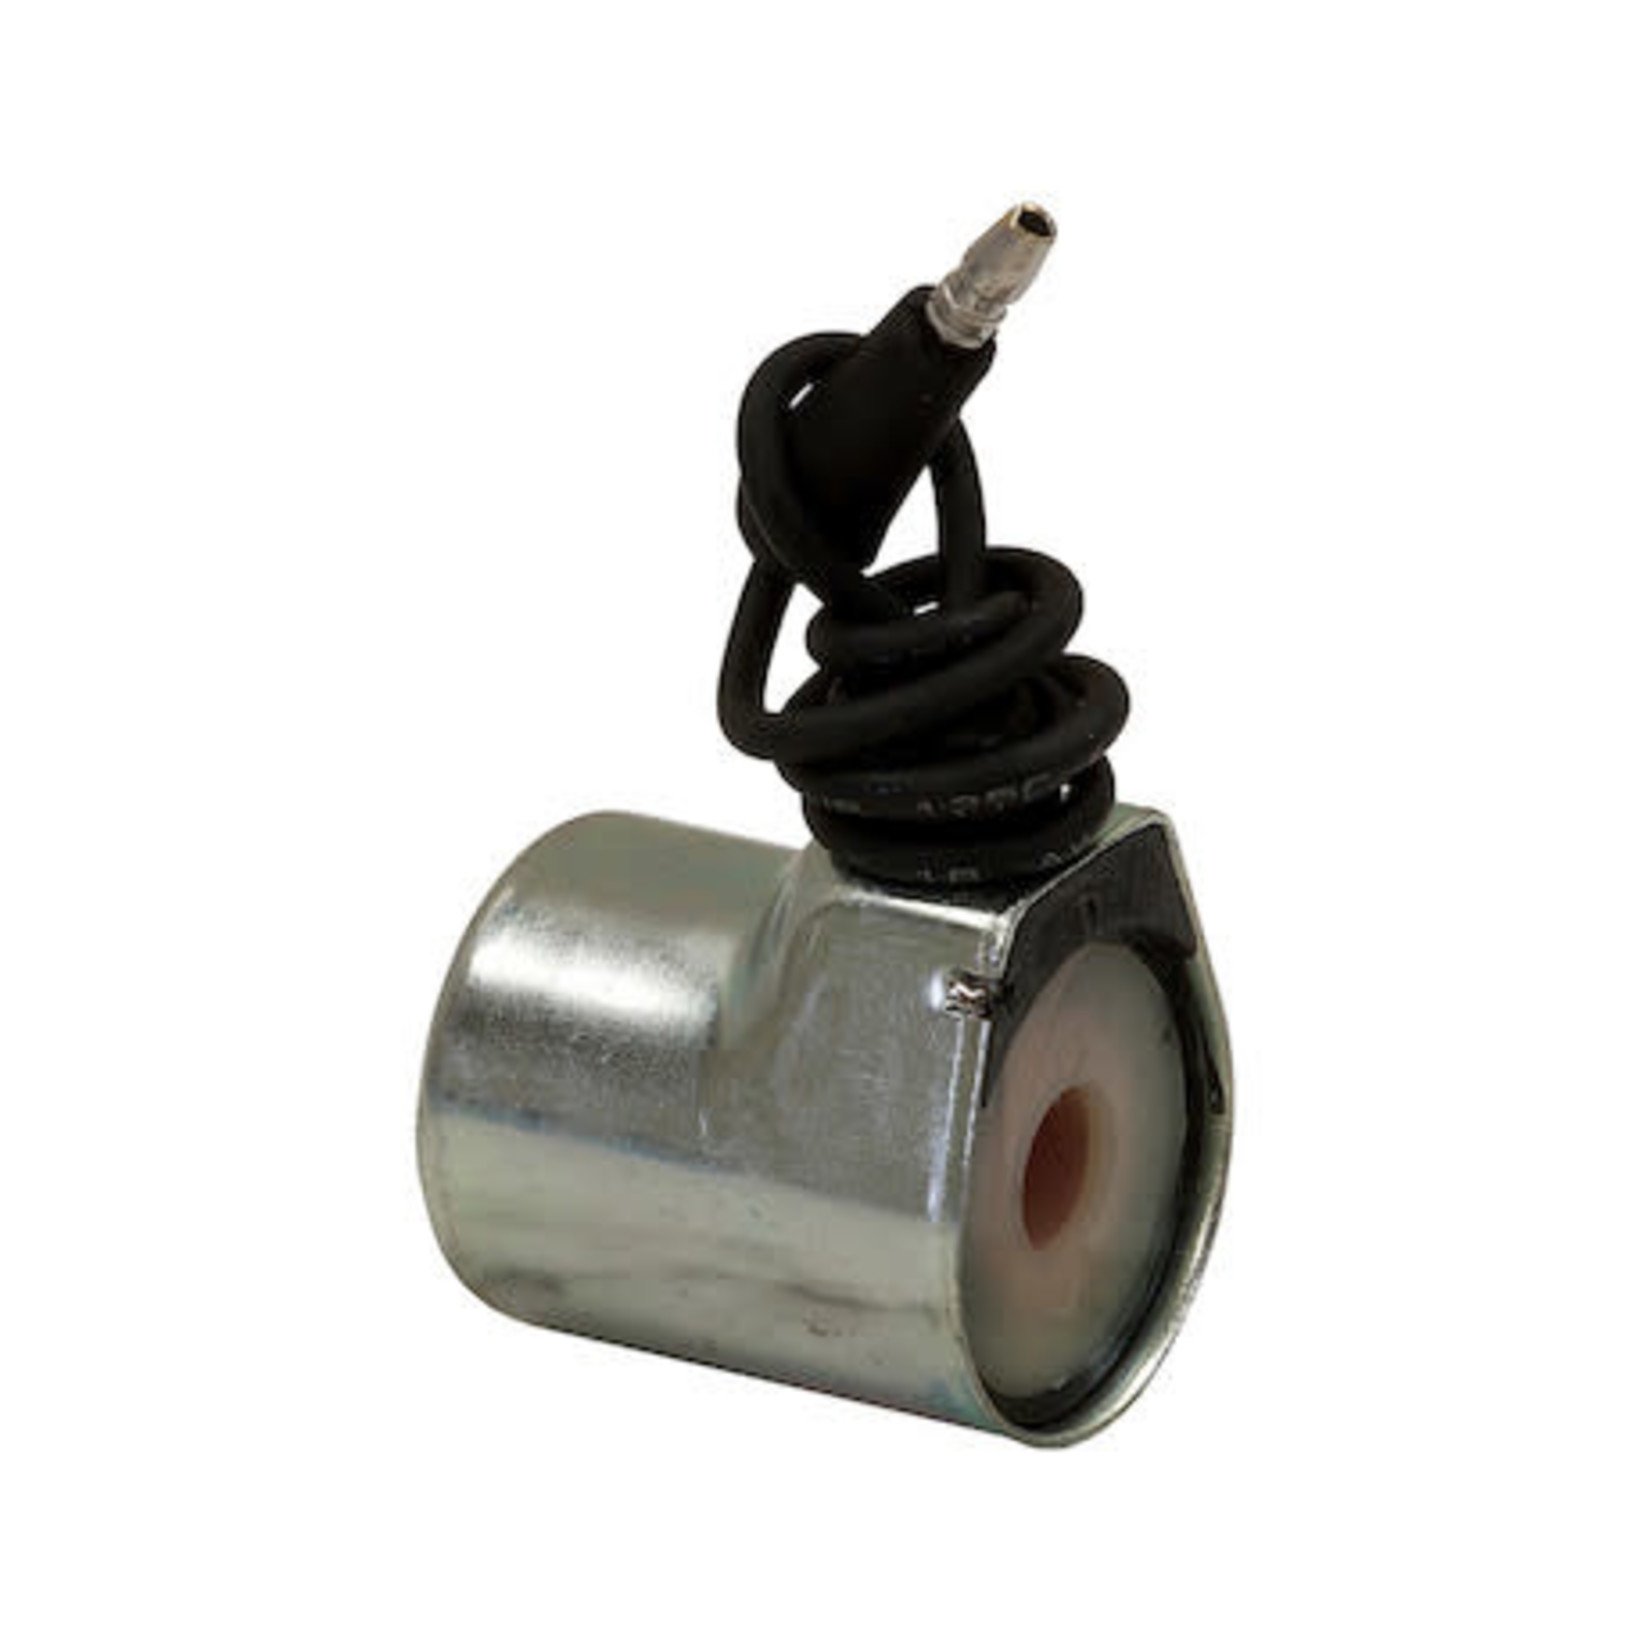 SAM SAM "A" Solenoid Coil With 3/8 Inch Bore-Replaces Meyer #15392